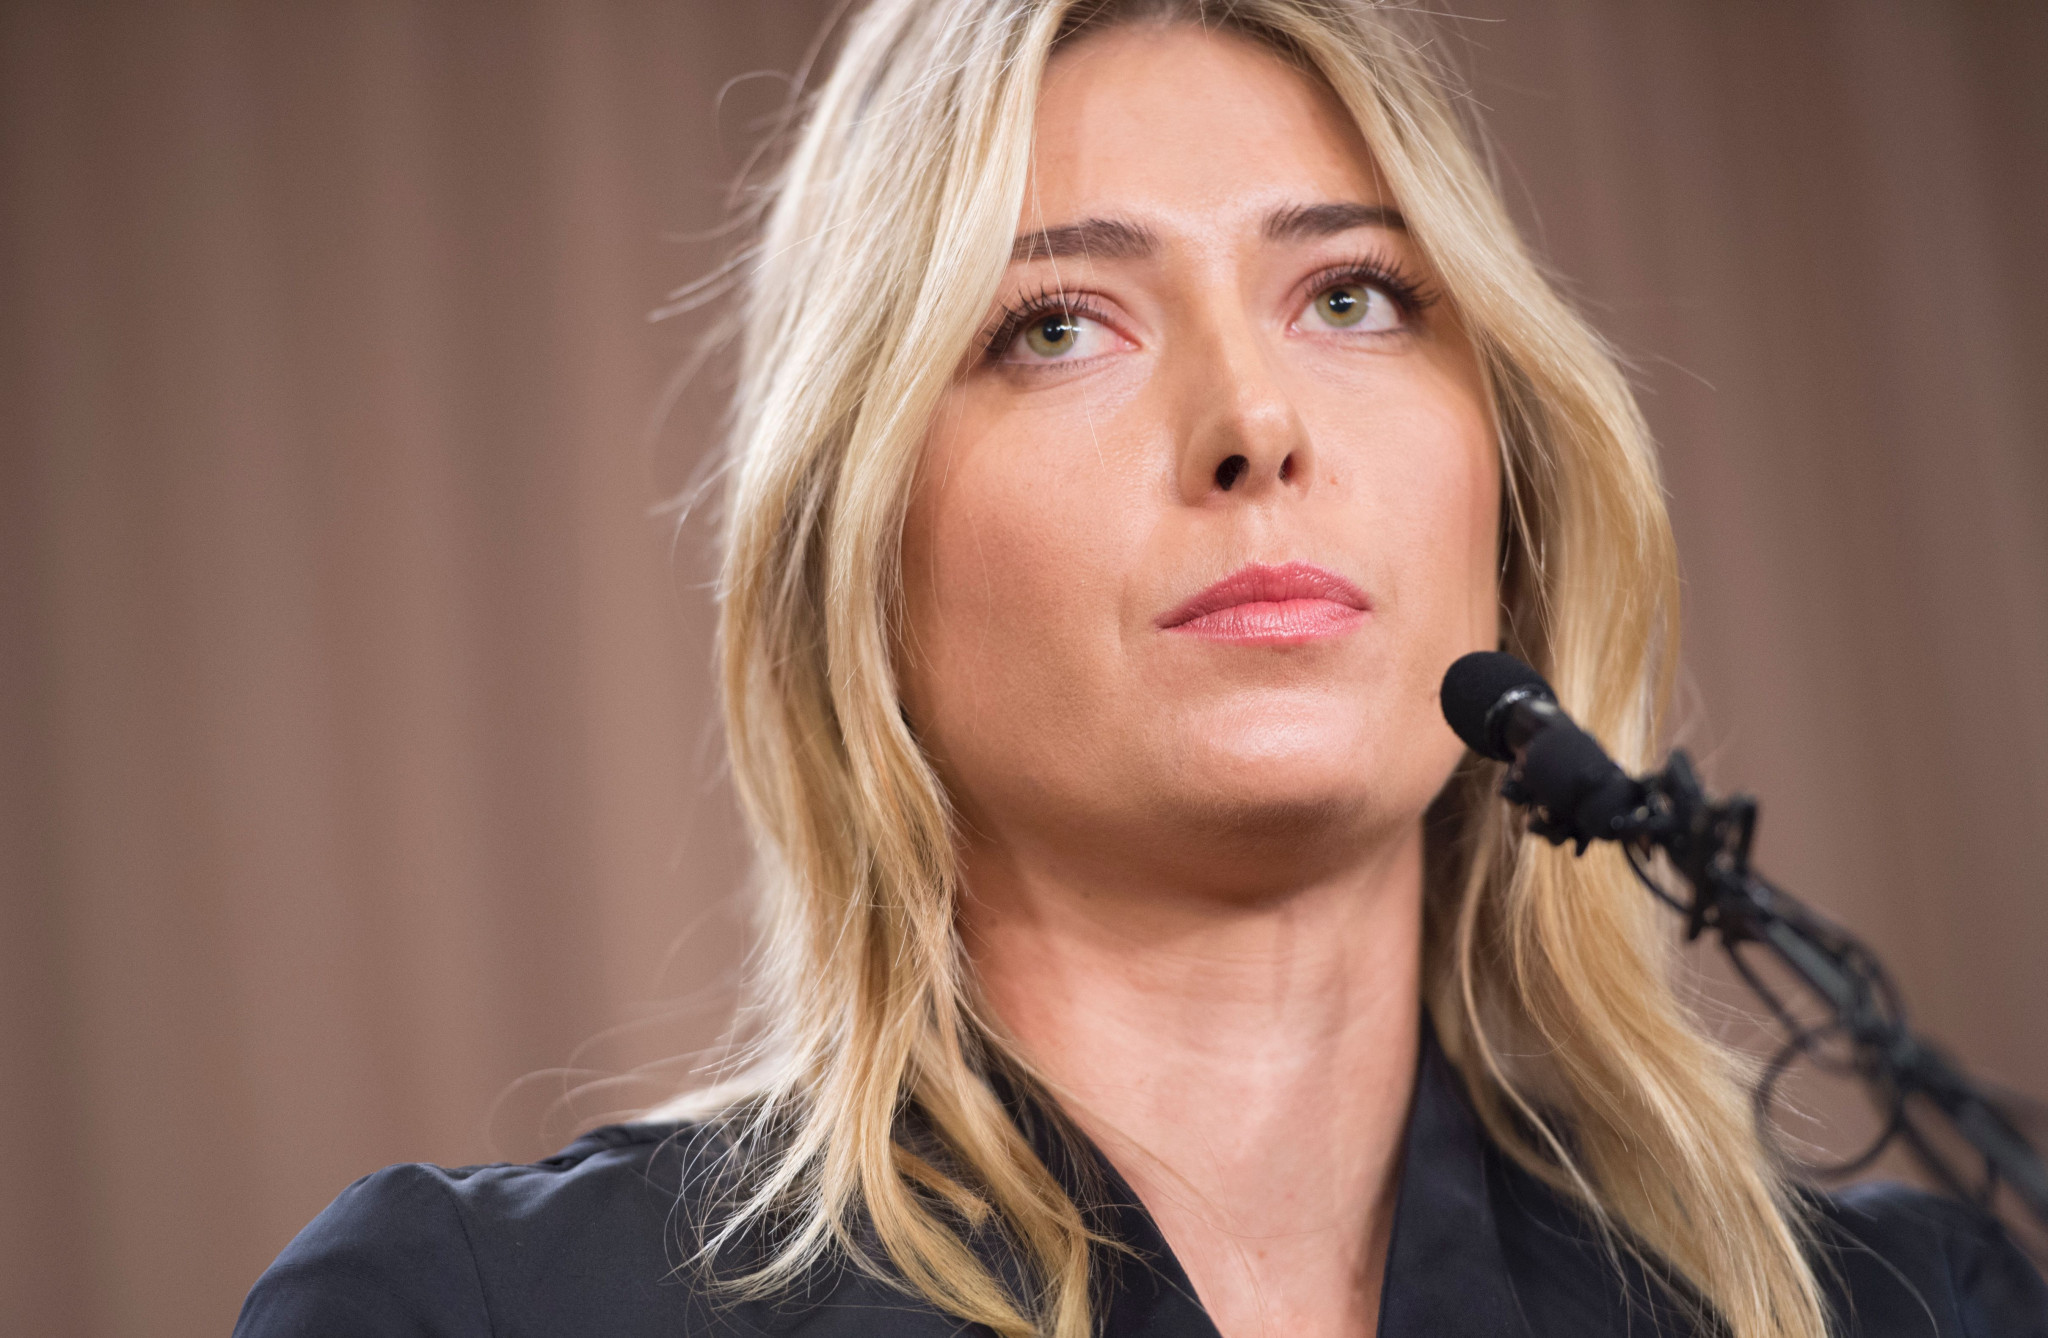 Maria Sharapova announced in March 2016 she had tested positive for meldonium at that year's Australian Open ©Getty Images